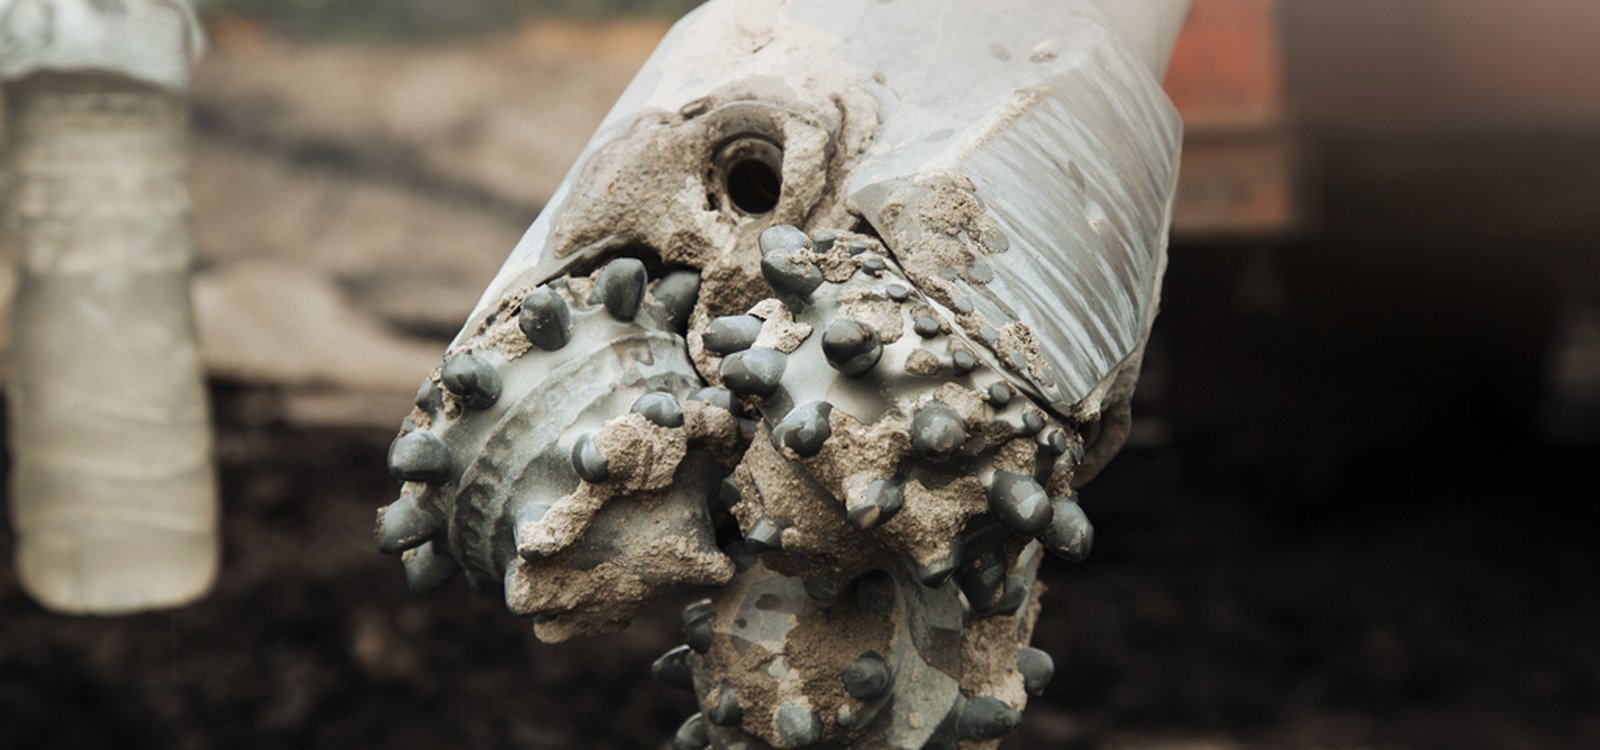 Sandvik engineered the RR220 X05 drill bit specifically for customers in these coalfields to satisfy their needs for increased bit life and higher penetration rates in soft and variable ground formations.